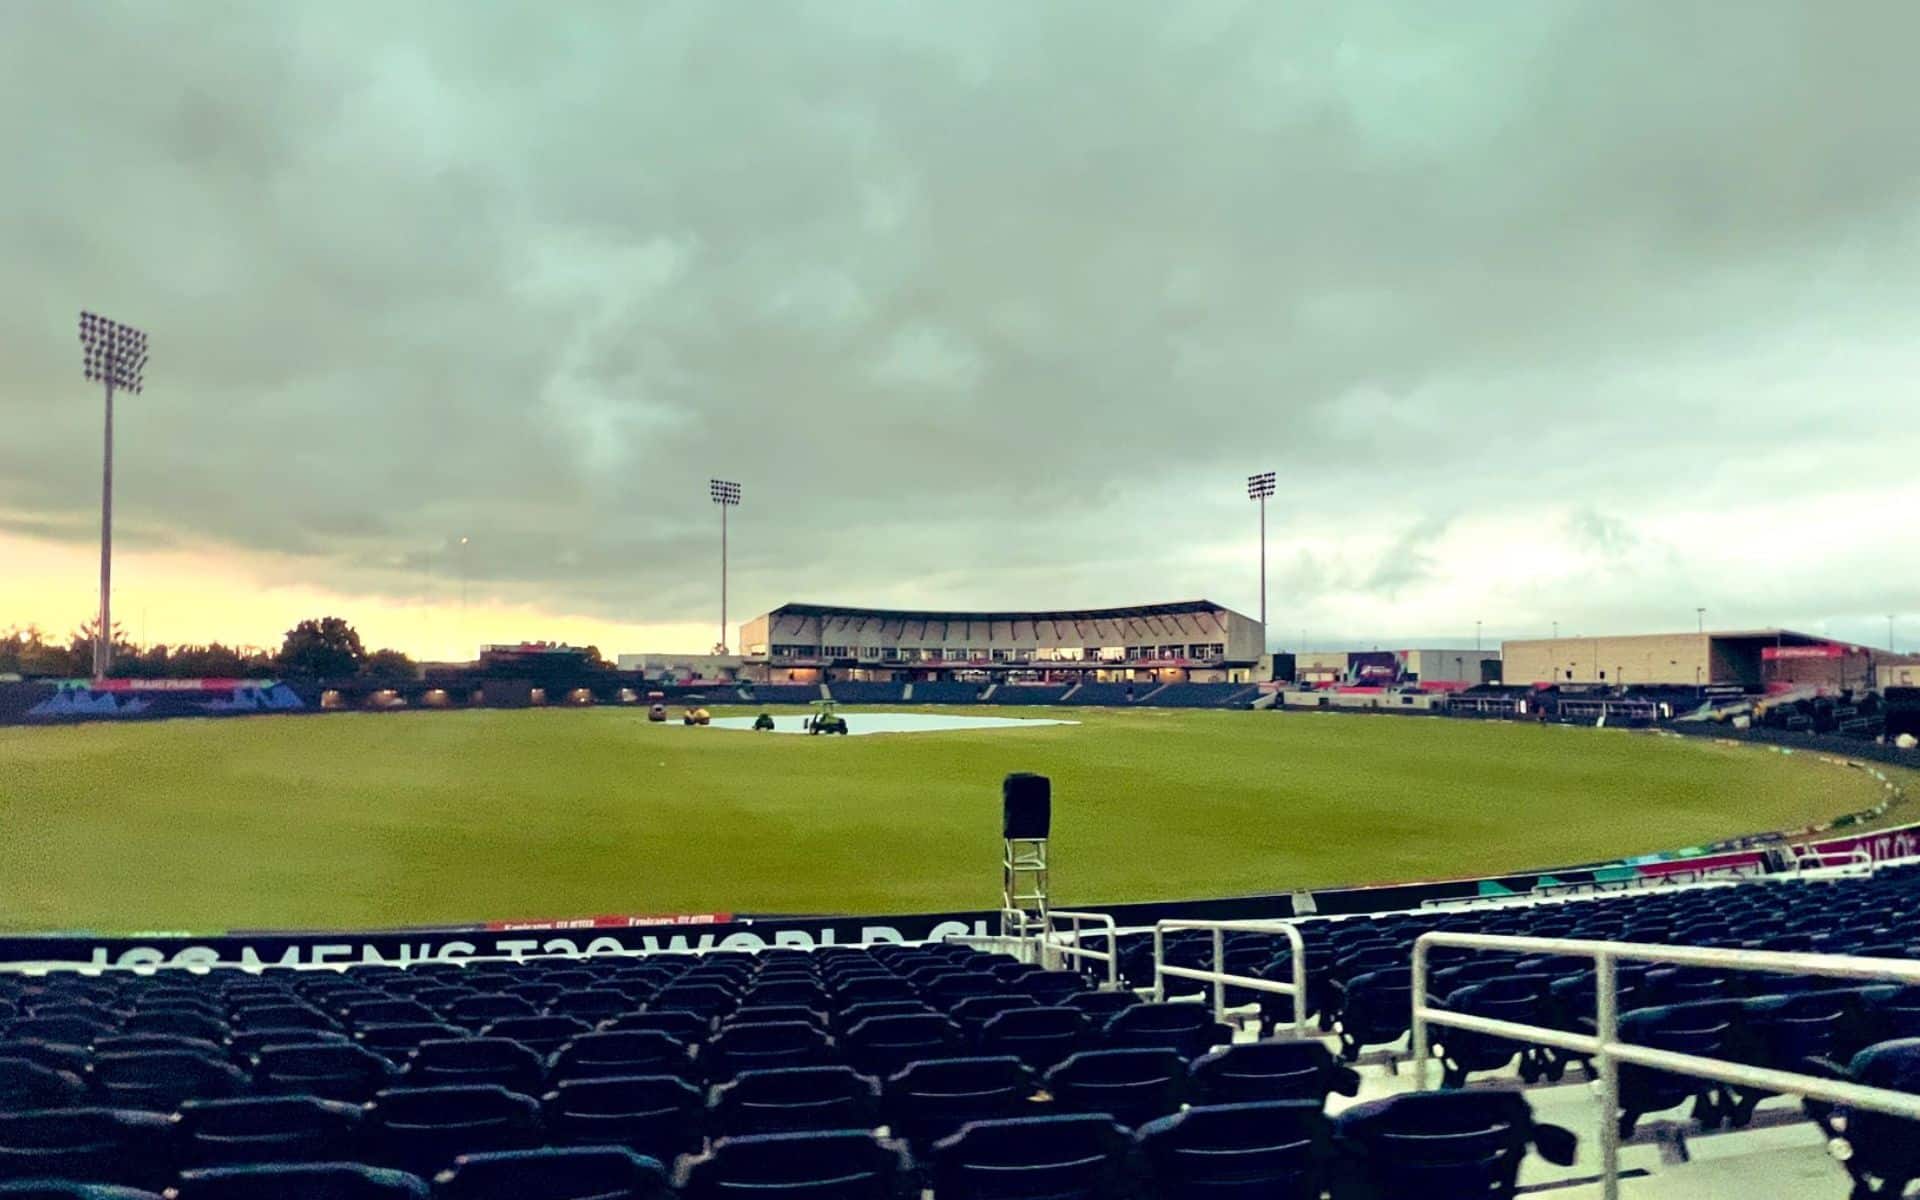 Grand Prairie Stadium Dallas Weather Report For NED Vs NEP T20 World Cup Match